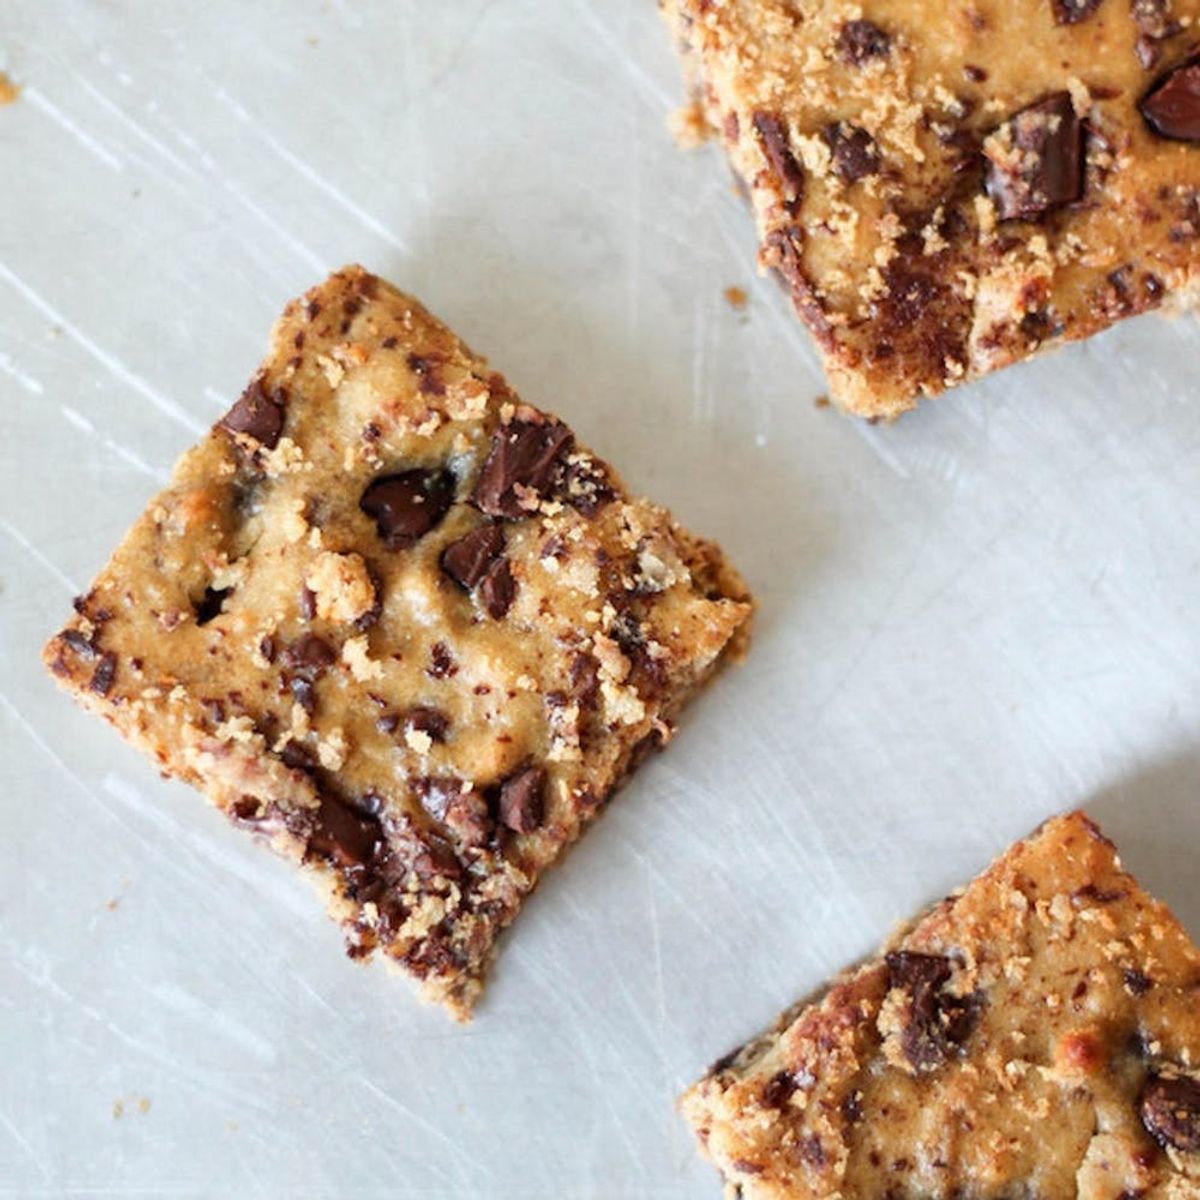 15 Dessert Recipes You Won’t Believe Are Made With Chickpeas